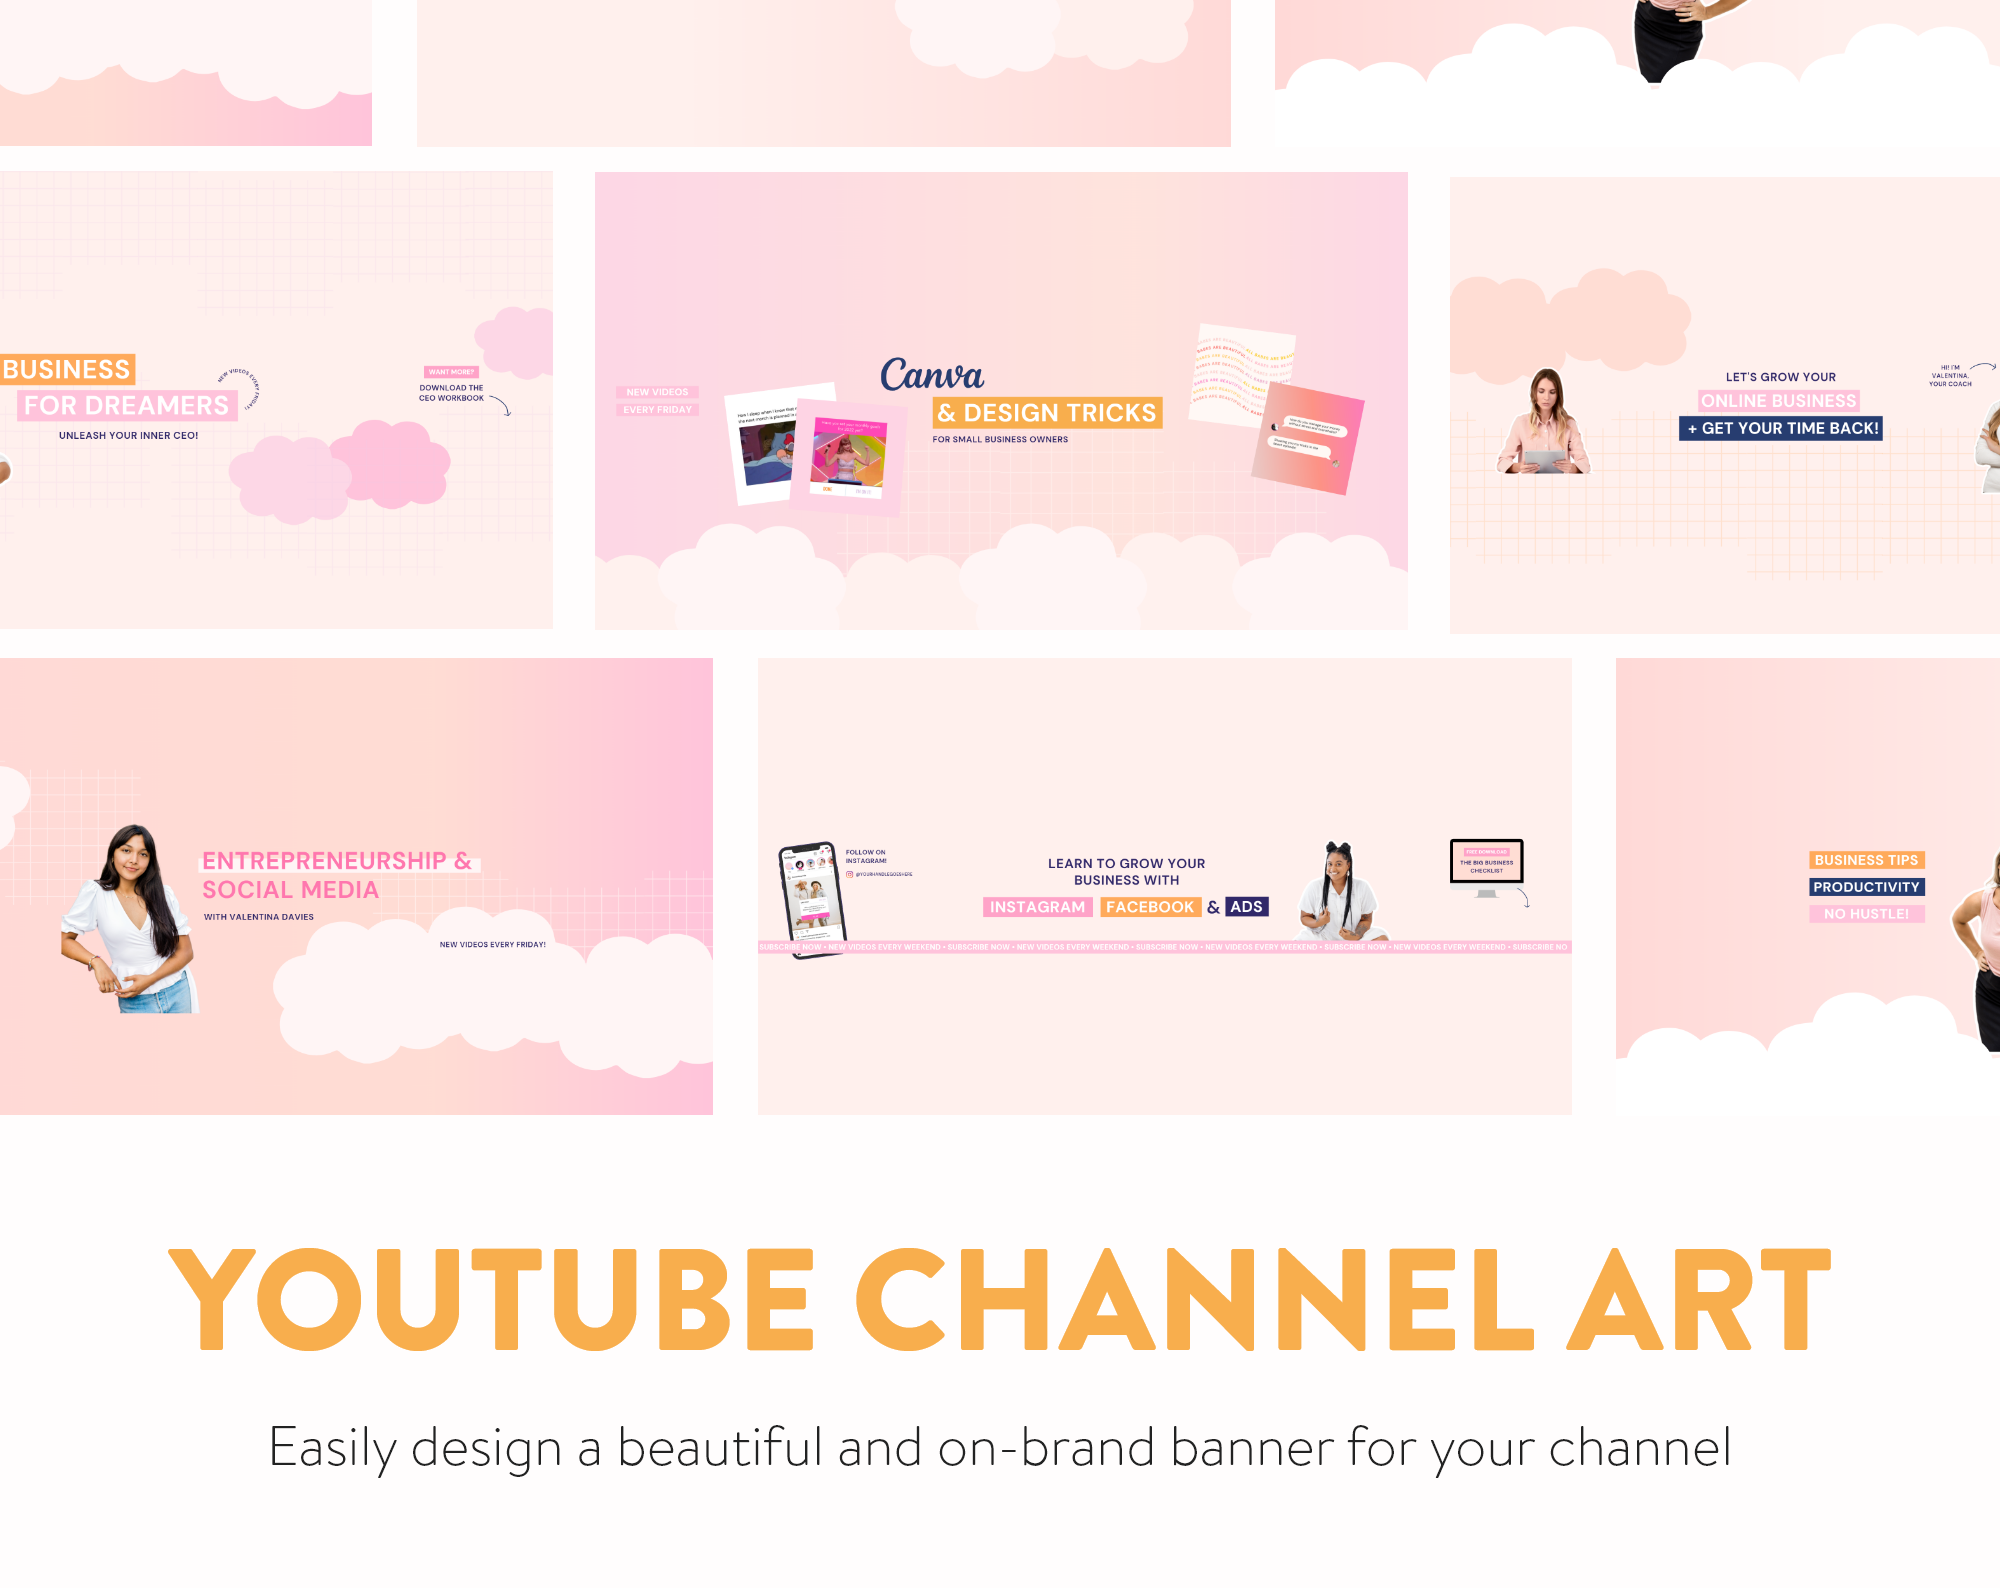 YouTube-marketing-template-pack-for-canva-channel-art-3